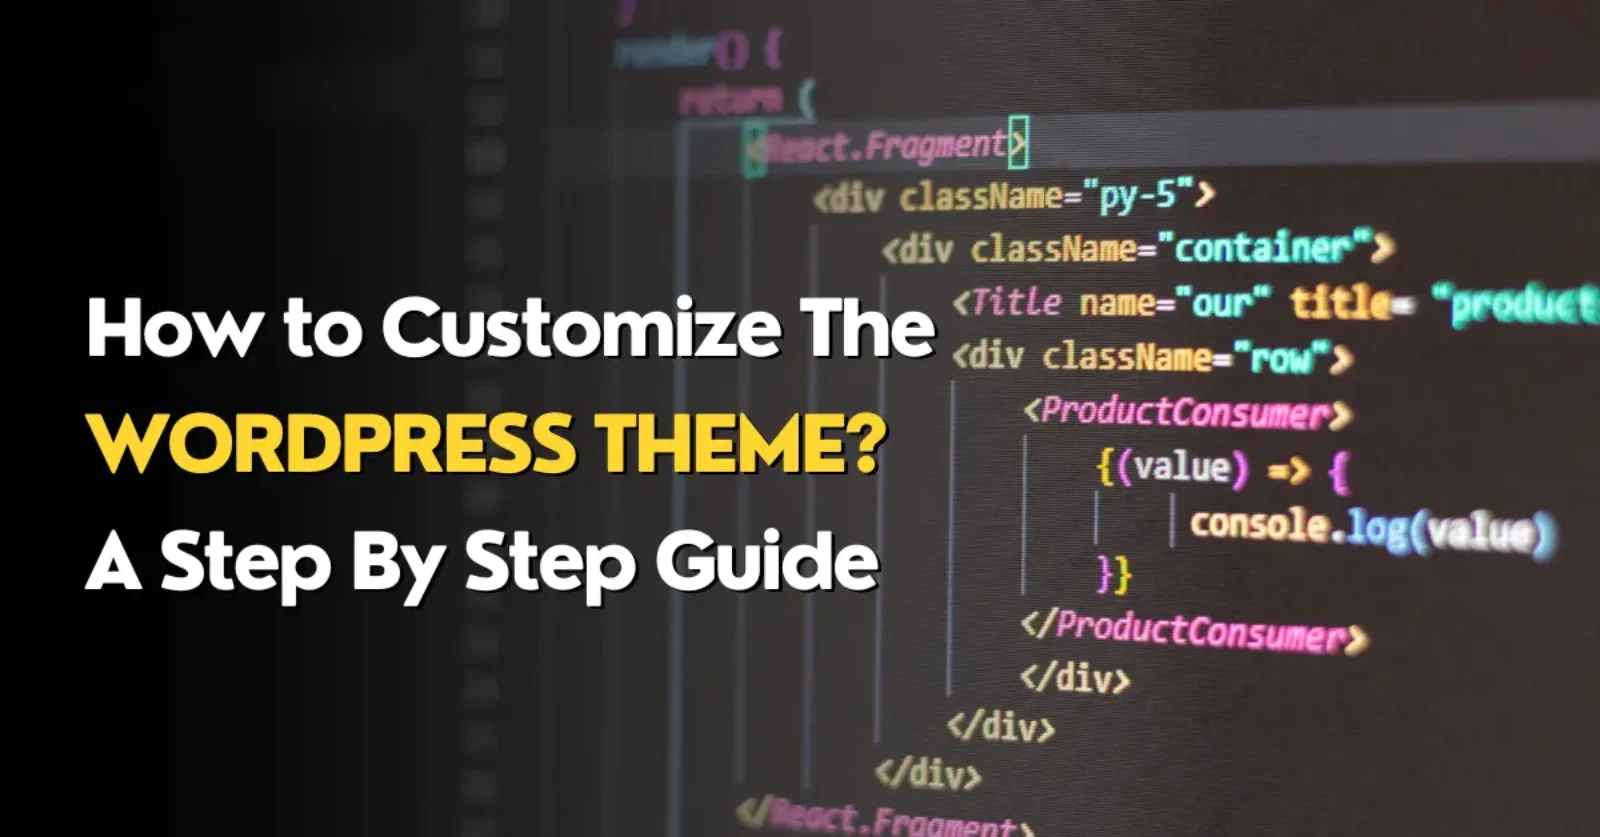 How to Customize The WordPress Theme? A Step By Step Guide